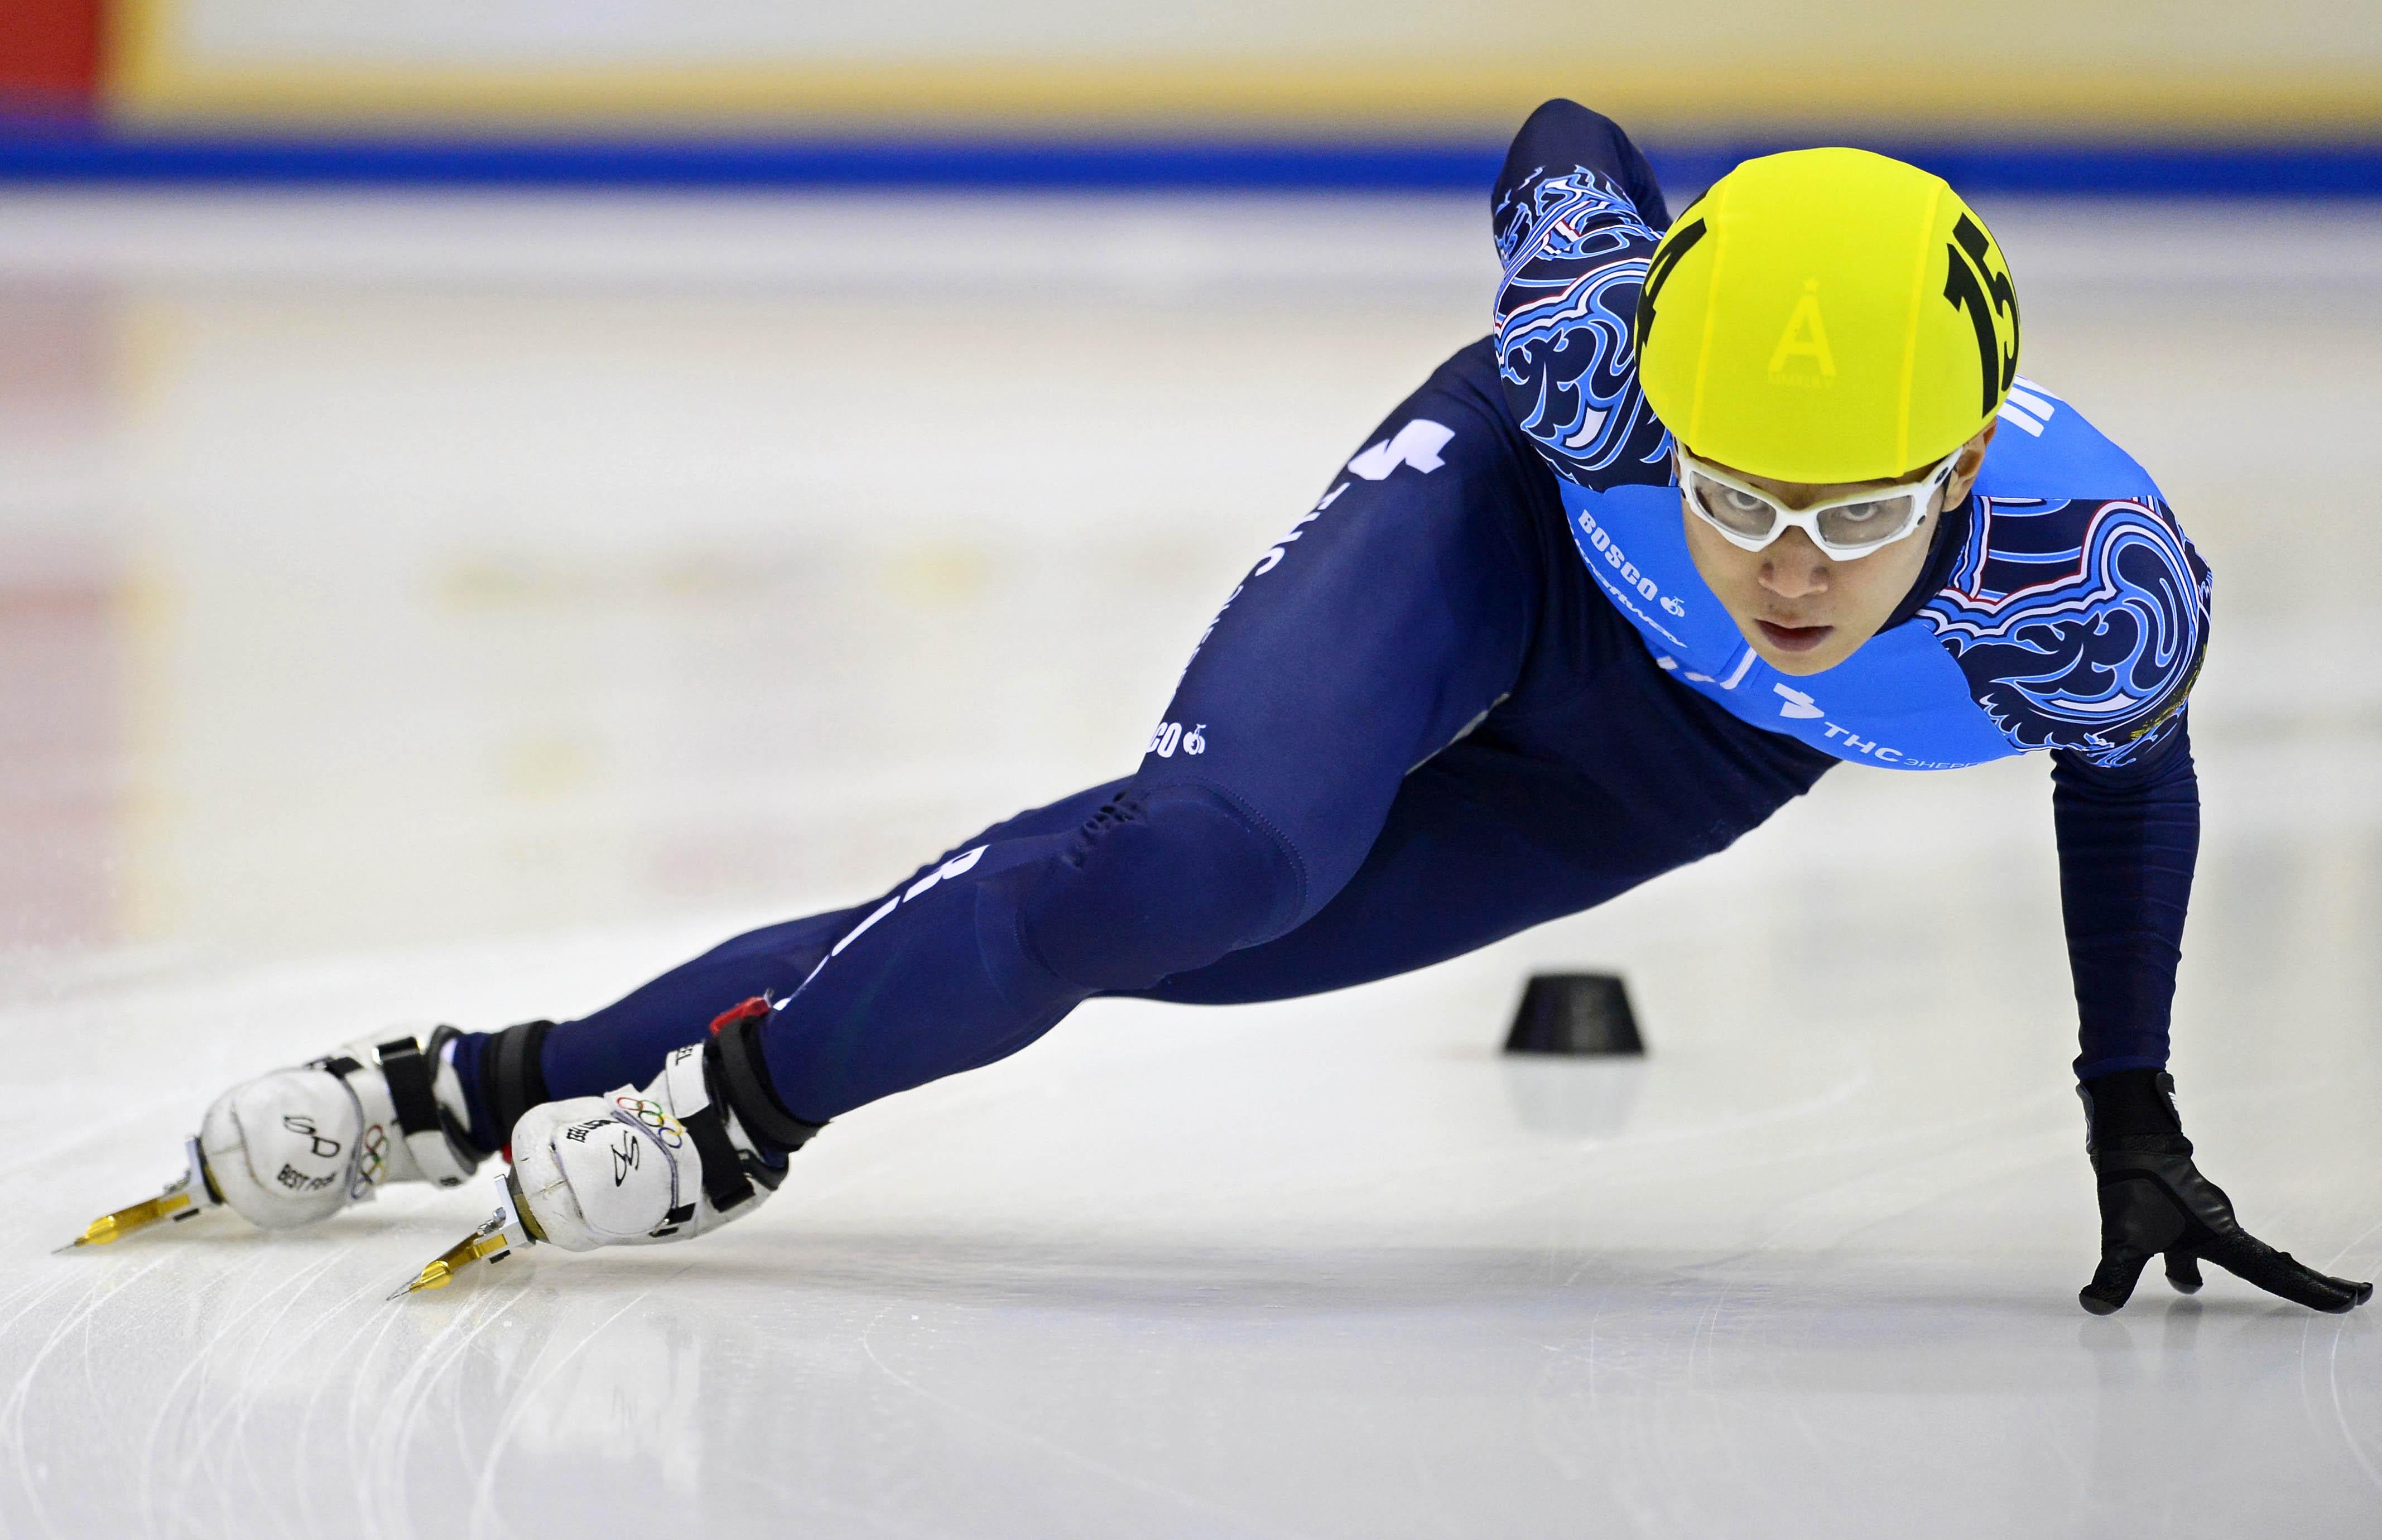 Victor An of Russia competes in the men's 1000m heat race of the ISU European Short Track speed skating Championships in Dresden, eastern Germany, on January 19, 2014. 